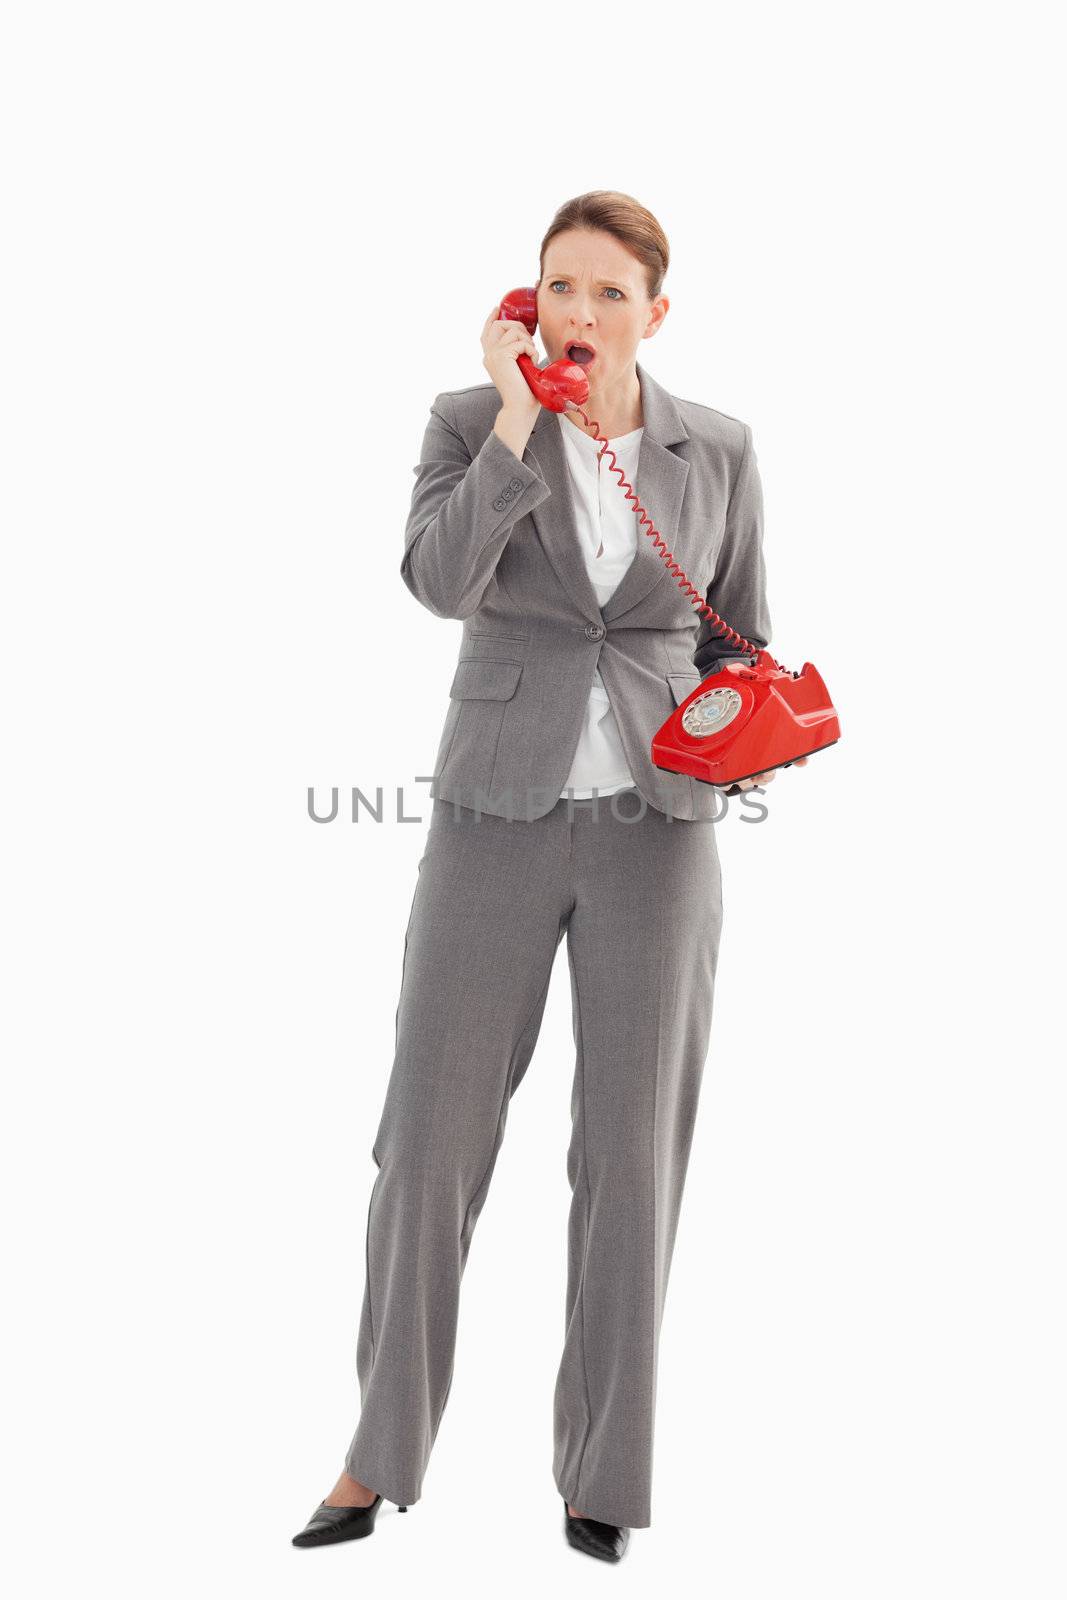 Angry businesswoman talking on the phone by Wavebreakmedia